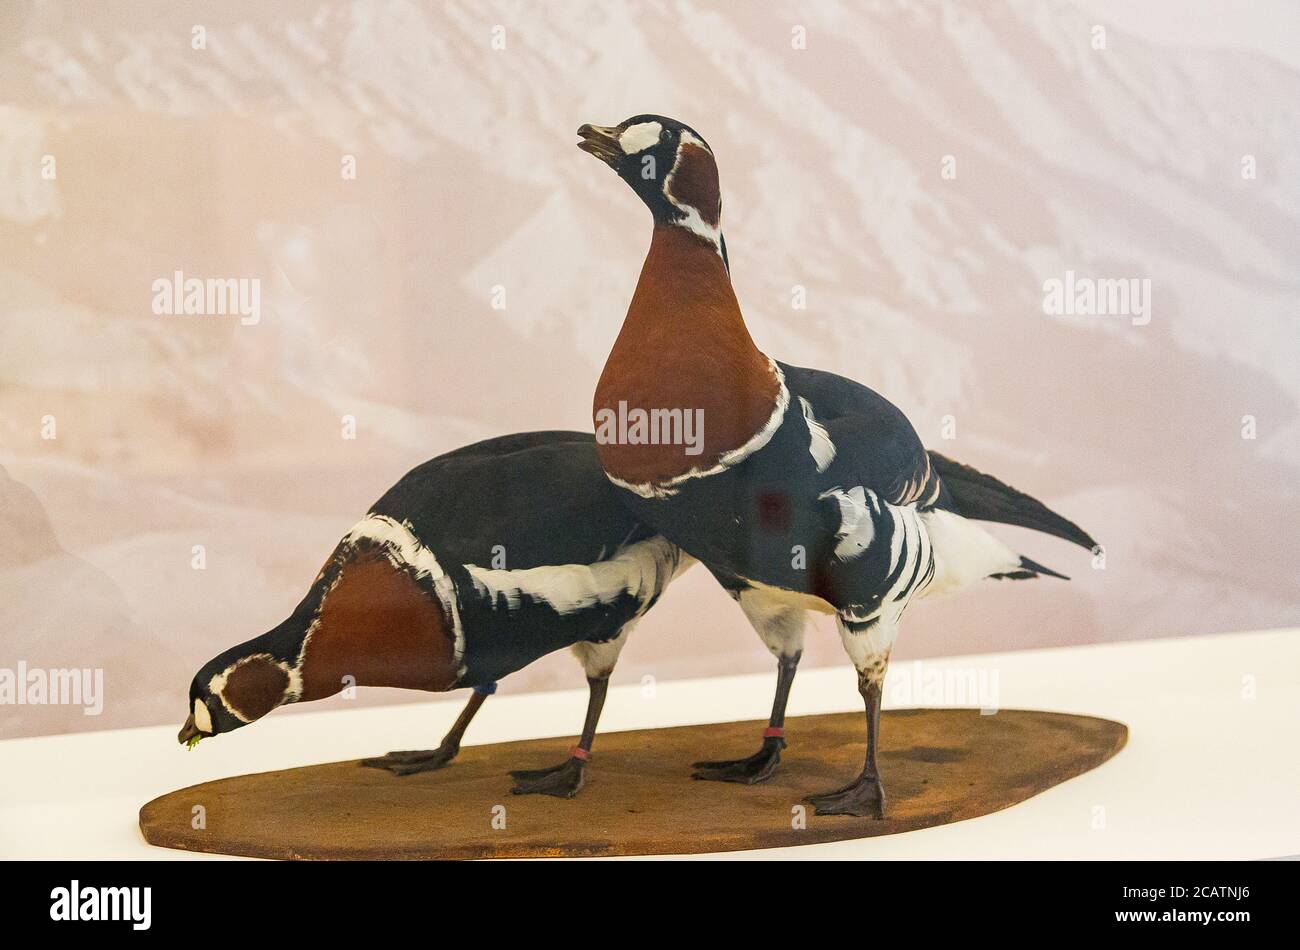 Exhibition 'The animal kingdom in Ancient Egypt', Louvre Museum in Lens, 2015. Naturalized brant geese, reminding the famous Meidum geese. Stock Photo